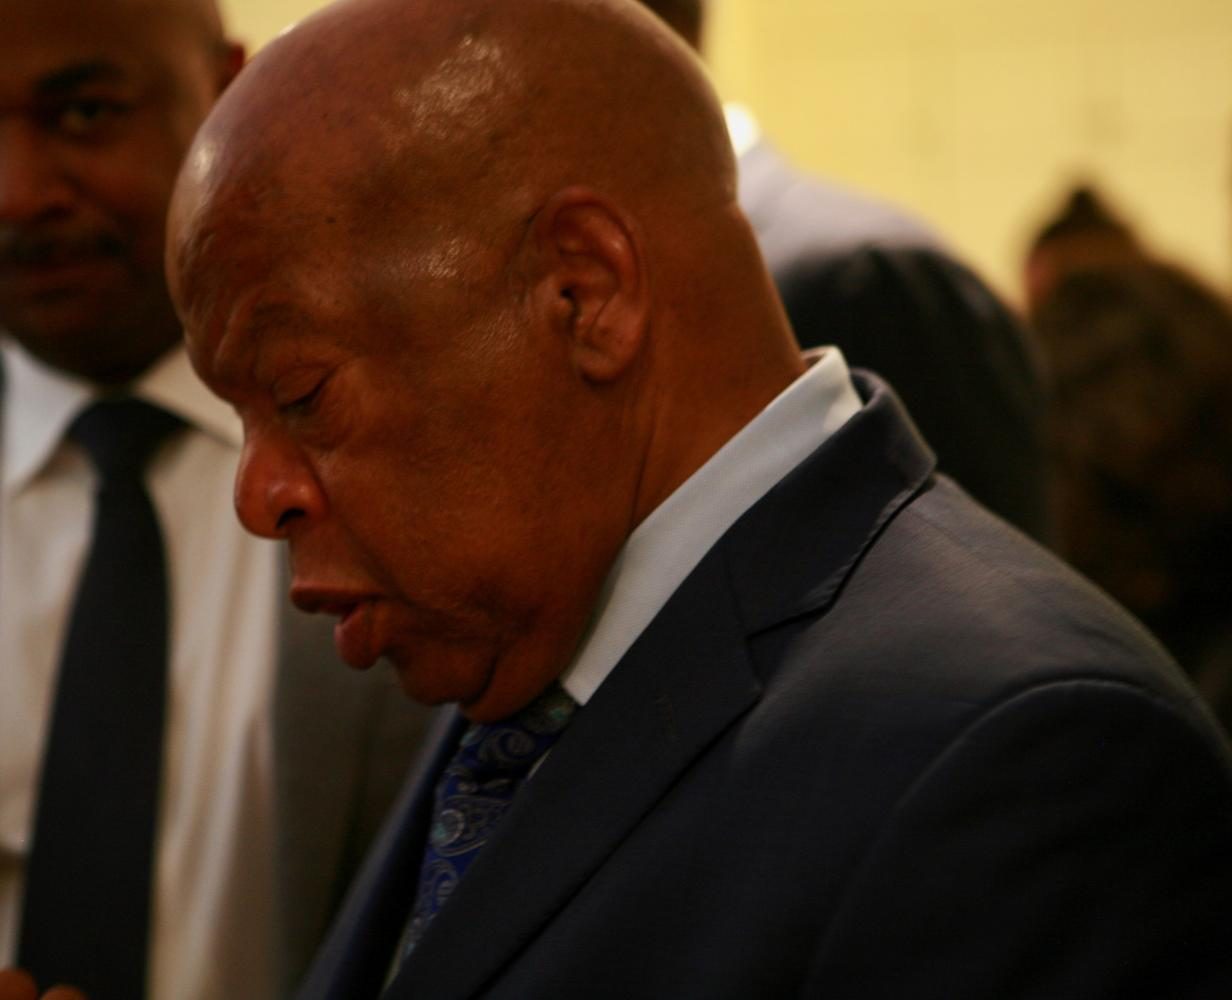 Congressman John Lewis speaks at Inman park about current issues including UVA protests.